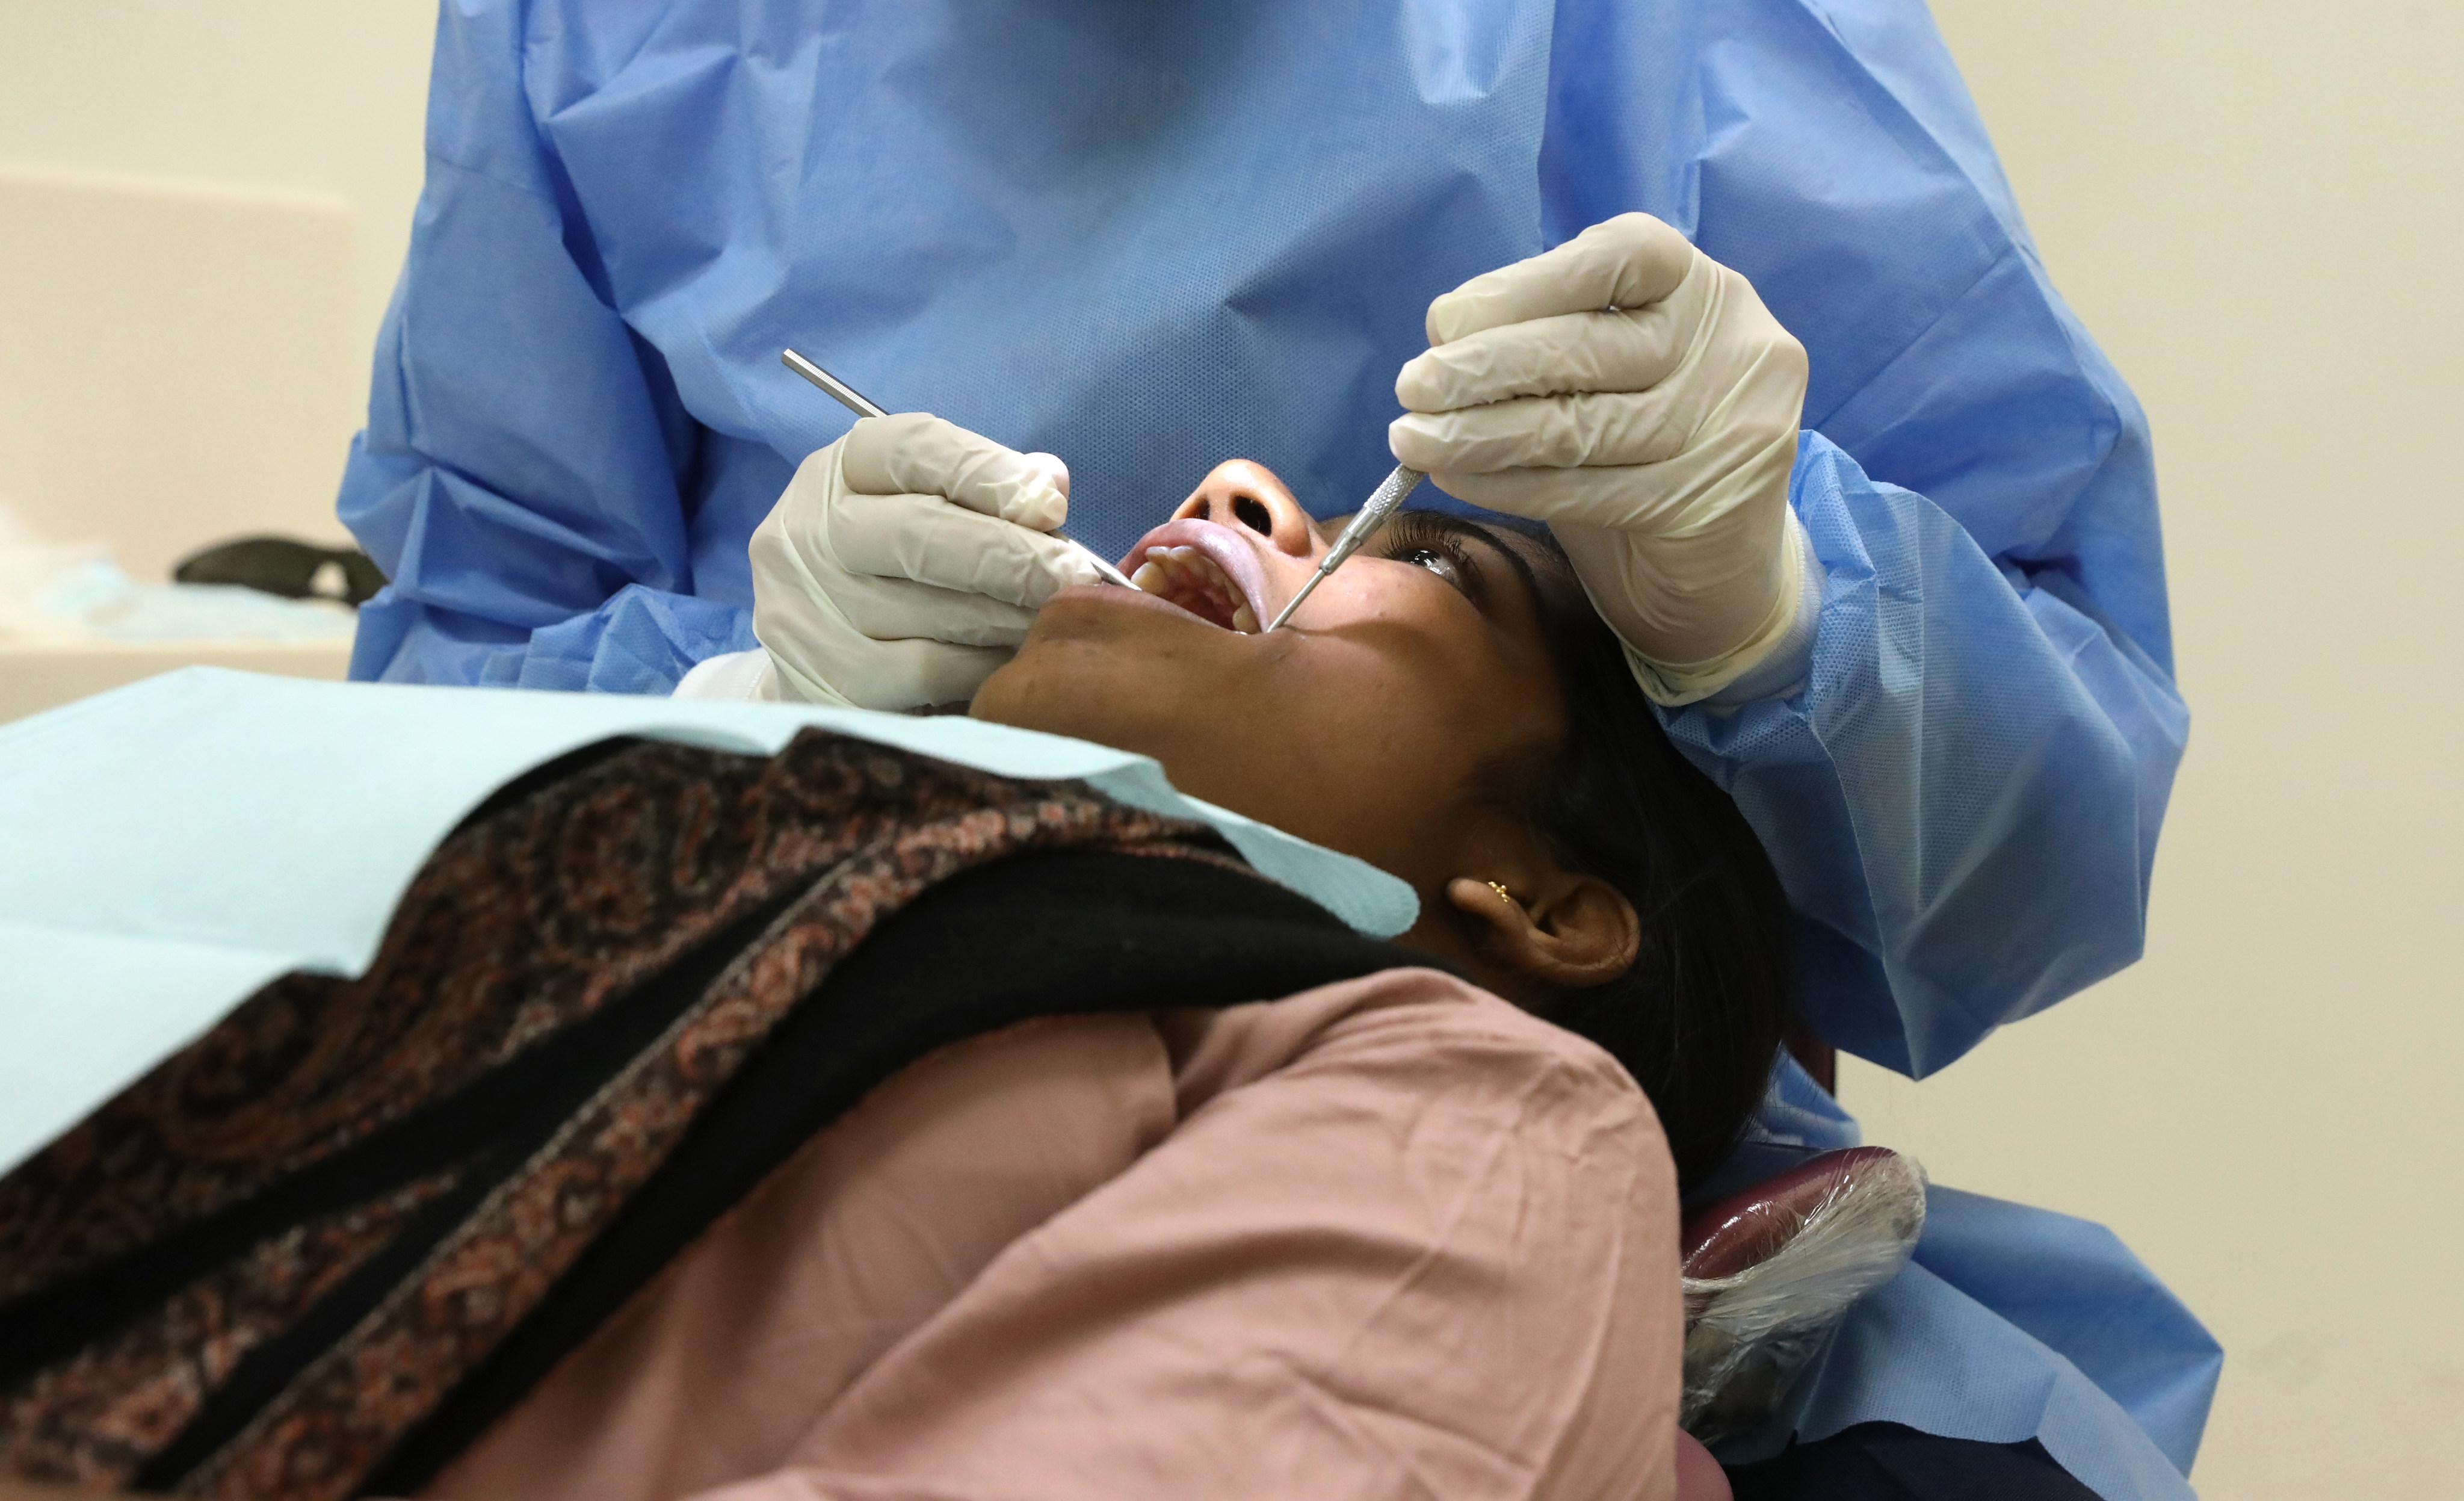 A dentist attends to a patient at the Prince Philip Dental Hospital in Sai Ying Pun in 2020. Photo: K.Y. Cheng